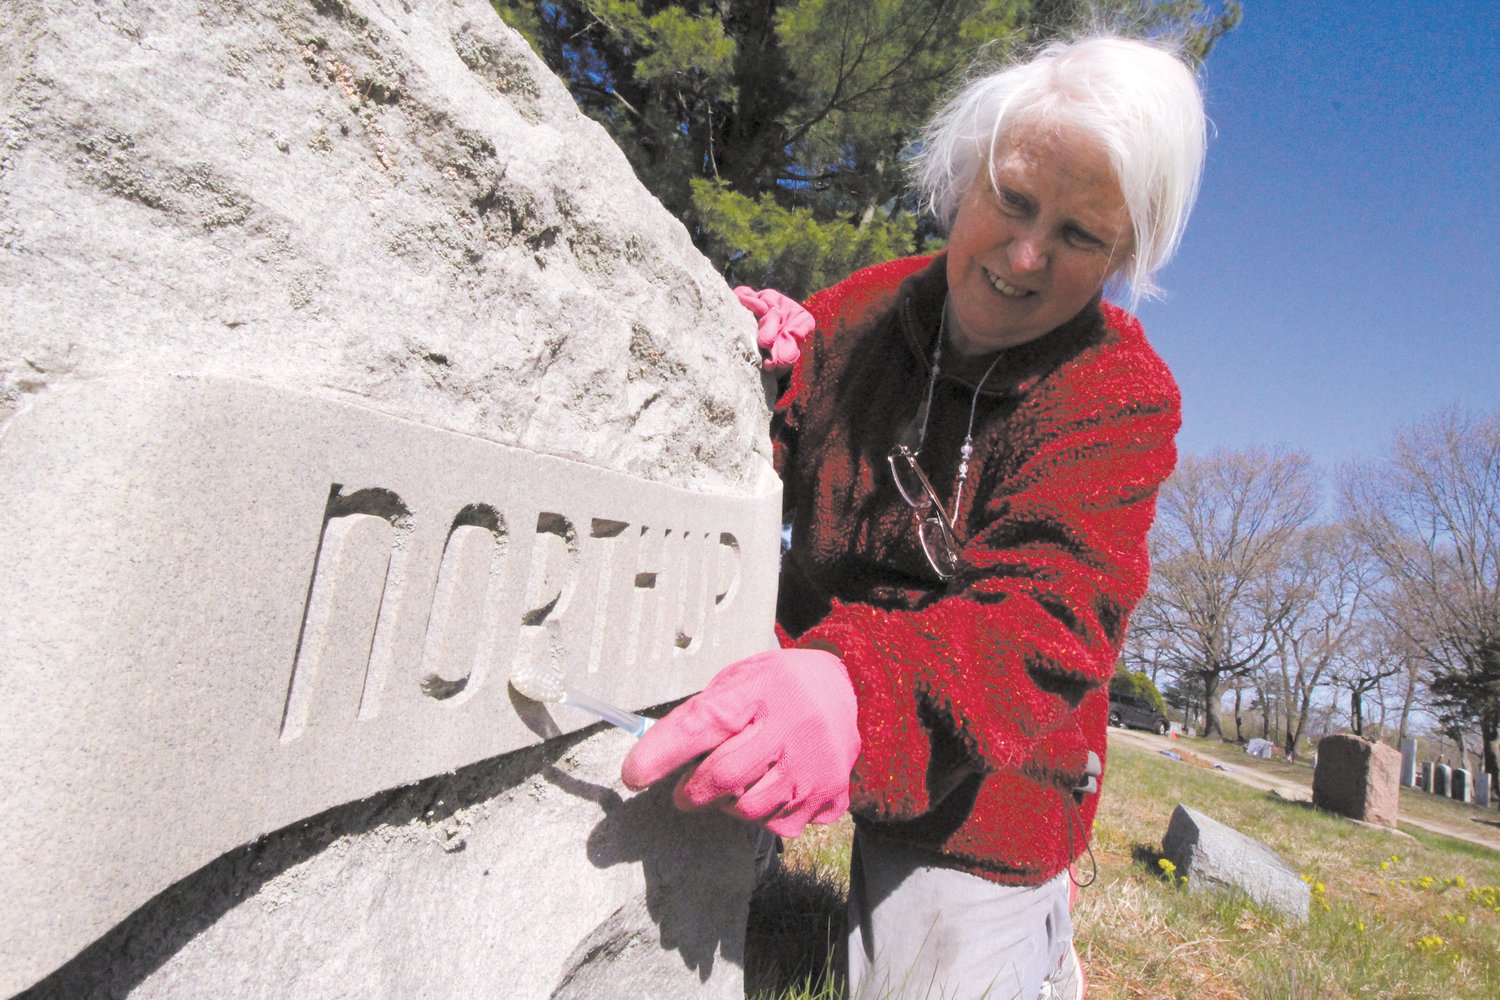 NO TOOTHPASTE: Historic Cemeteries Commission chair Pegee Malcolm uses a tooth brush to clean the lichen that has grown in the lettering of this grave stone. She provided the following outlined of what the commission has planned for May 14 from 1-2:30 pm:  “We will be flagging all the veterans at Brayton ,( there are 260) then we will have a scavenger hunt . Participants will have to find carvings, writings, or symbols on the head stones. These will include items like a headstone taller than you, a headstone with a President’s name, a headstone with your first or last name, a veteran of WW2, a religious symbol on a headstone, a person younger than 10 years old, fruit or flowers carved on a headstone.  There are 25 items to find. Along the way, we will have members of our commission sitting at various graves to explain a bit about that person, such as Thomas Vaill, a Civil war soldier who was on the Ironclad Monitor, Orrin Perry, who was known as Skeleton man in the Barnum and Bailey circus( thank you Kelly Sullivan) Judge Brayton, who was a state Supreme Court justice, . There will also be lawn signs at various headstones to explain the symbolism on them. We are asking folks to use their phones or a camera to take pictures of what they find, but are including a map of the cemetery so in the case of no camera they can circle an area where they find each item. We will be giving prizes to the first 3 people (or groups) that find everything.”